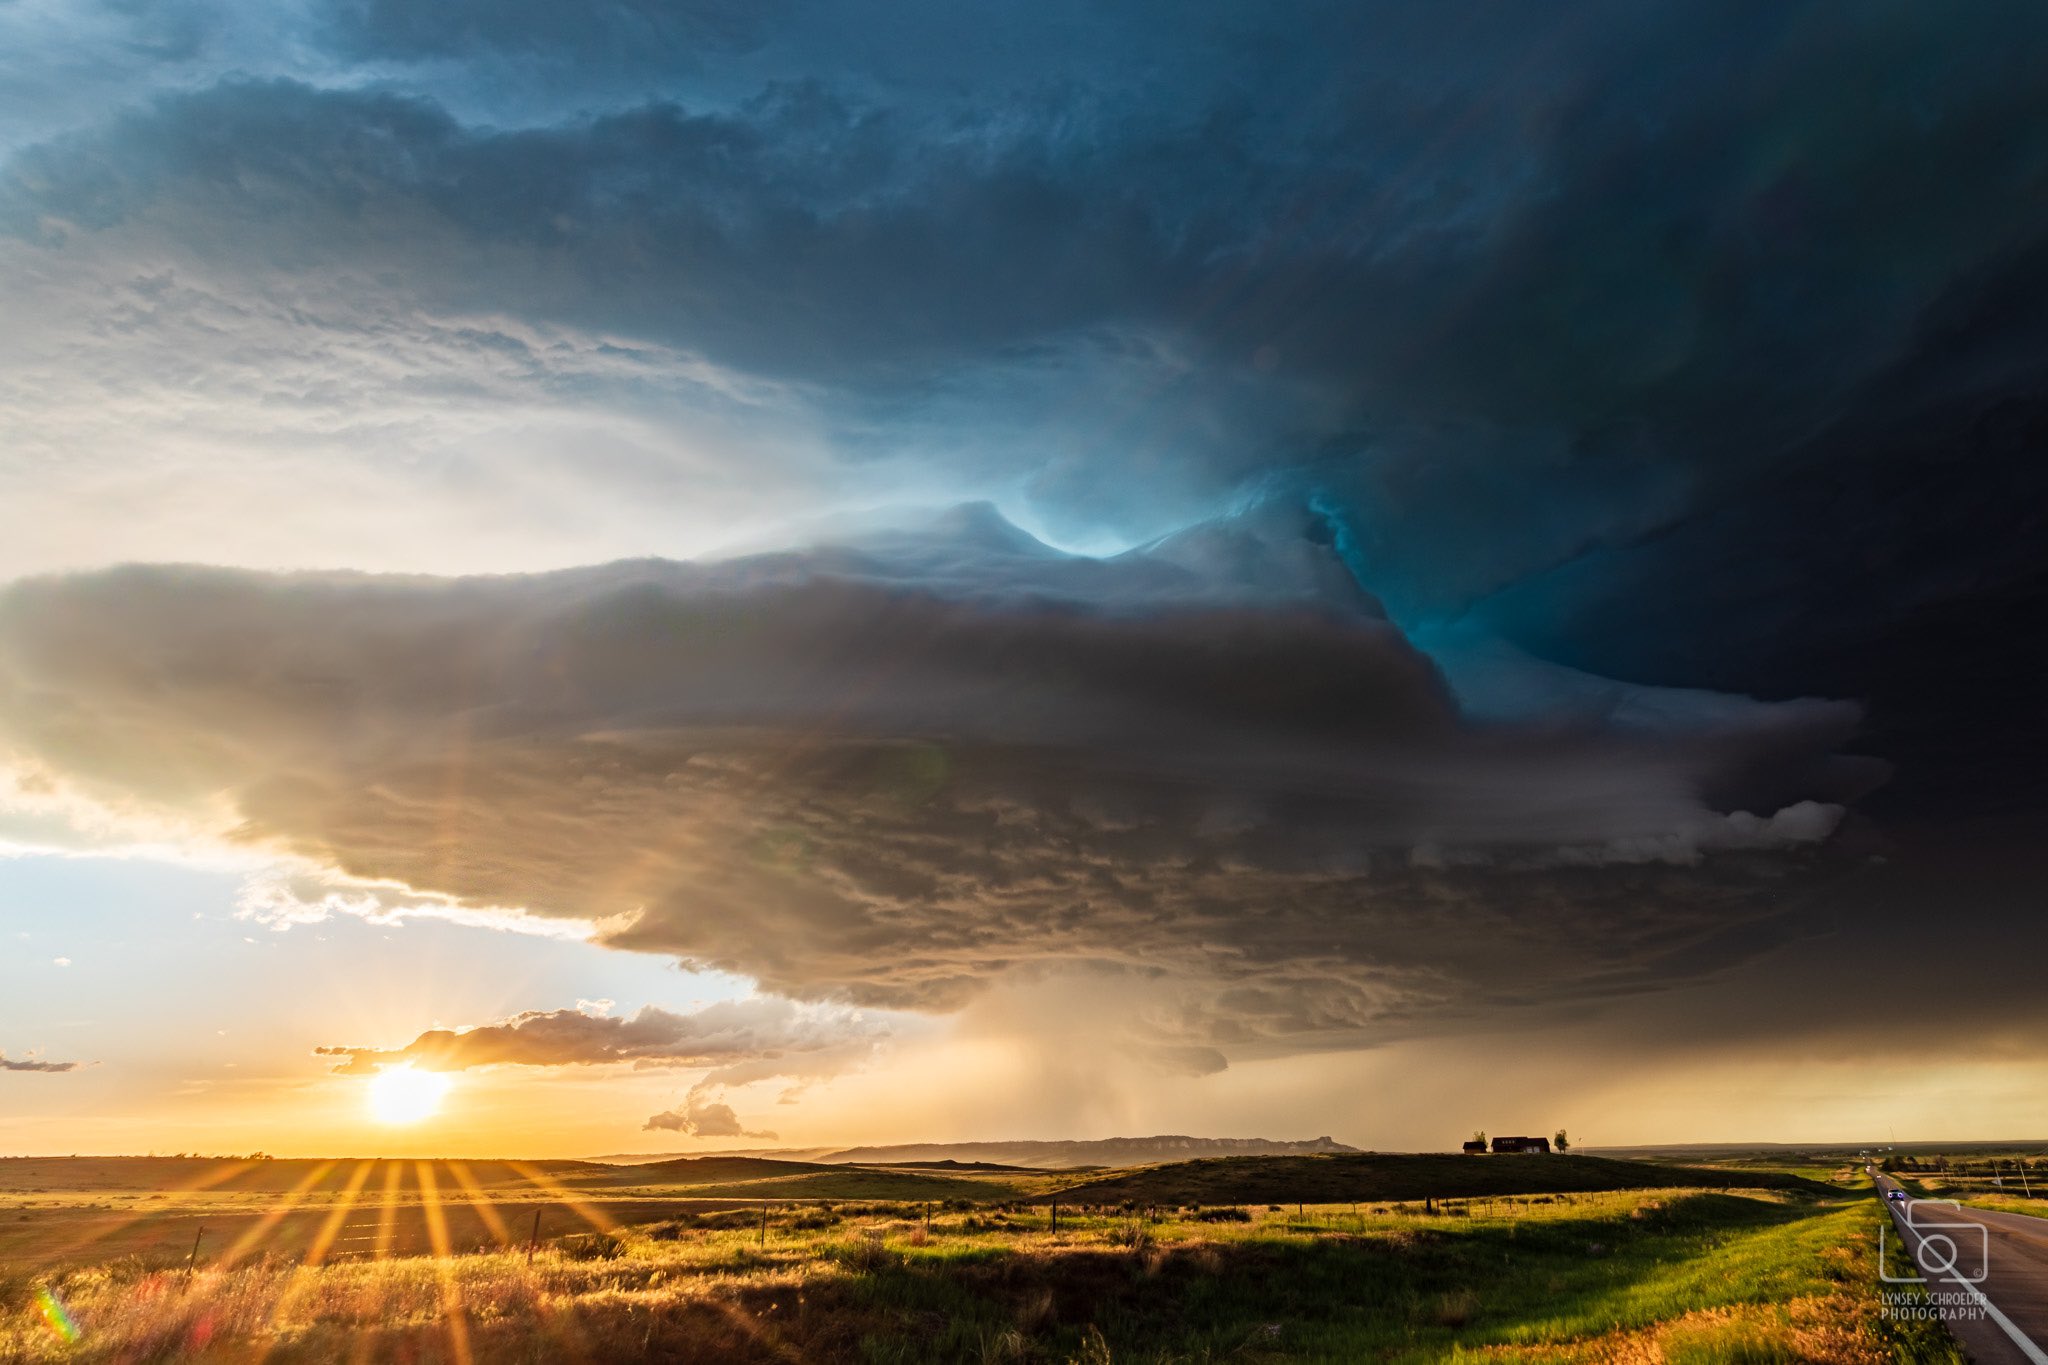 2nd Place Chasing unexpected supercell across the Nebraska panhandle at sunset by Lynsey Schroeder @LSchroederPhoto